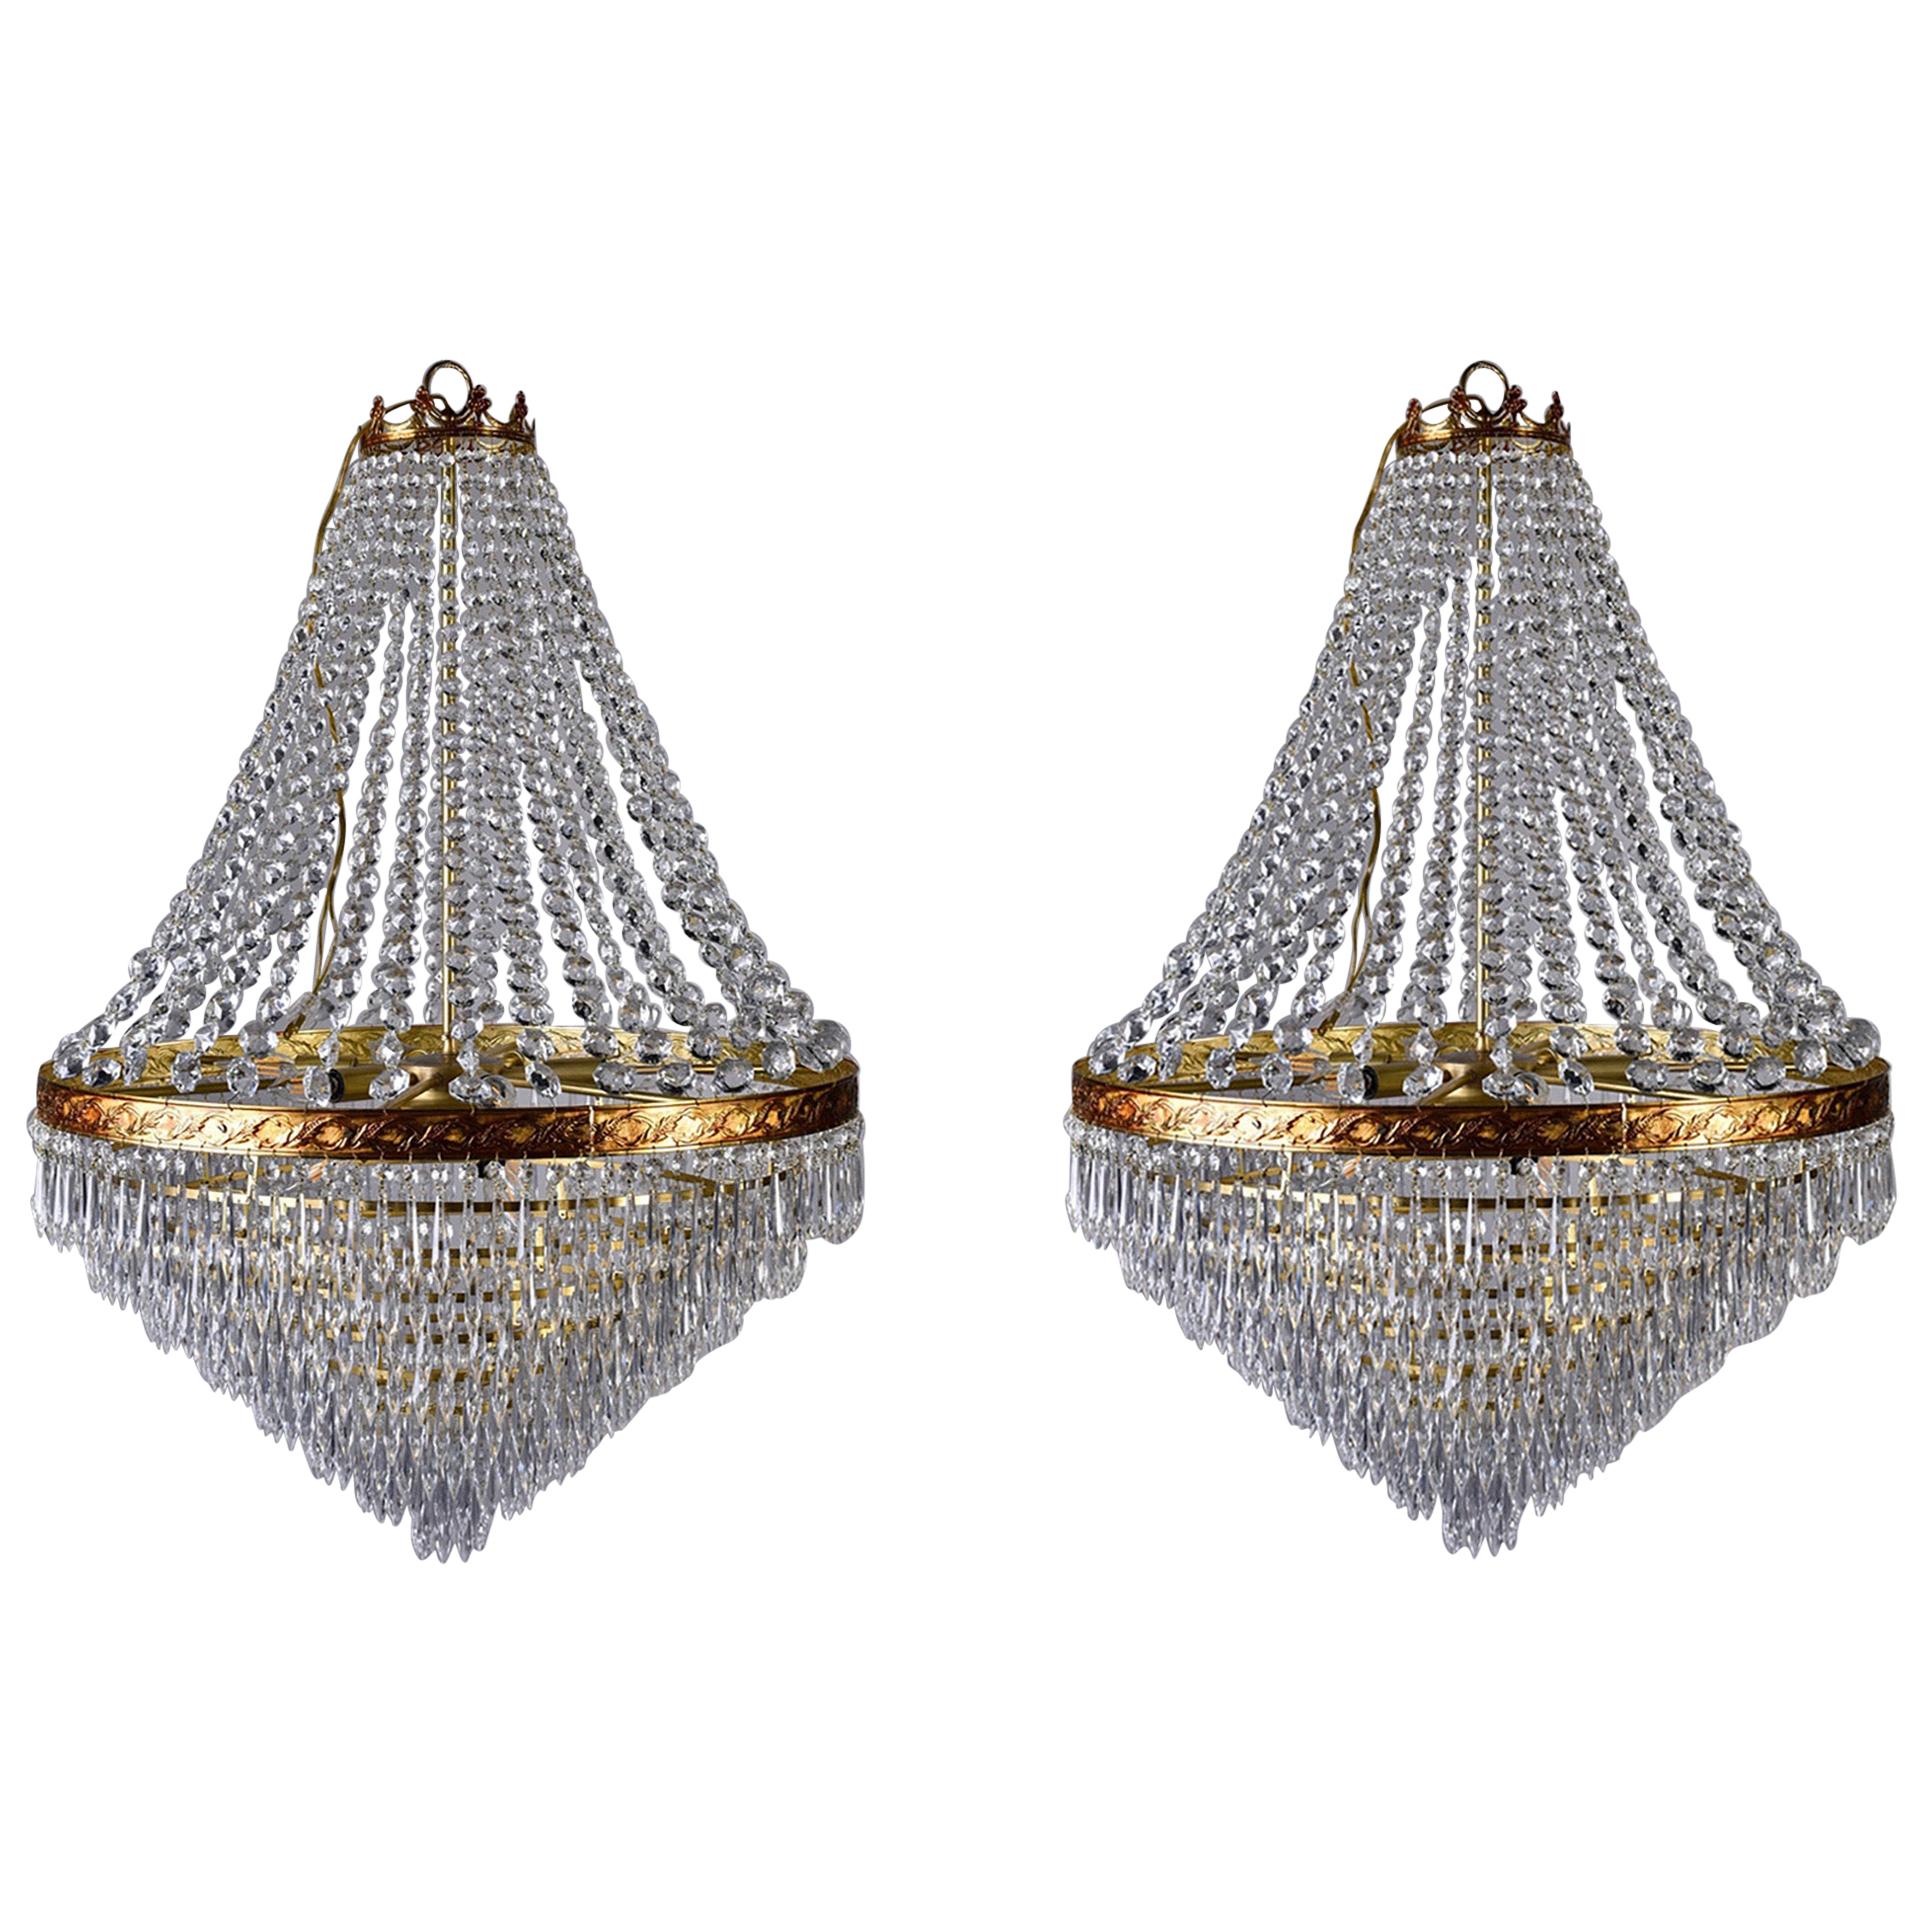 Large Midcentury Italian Wedding Cake Style Brass and Crystal Chandeliers, Pair